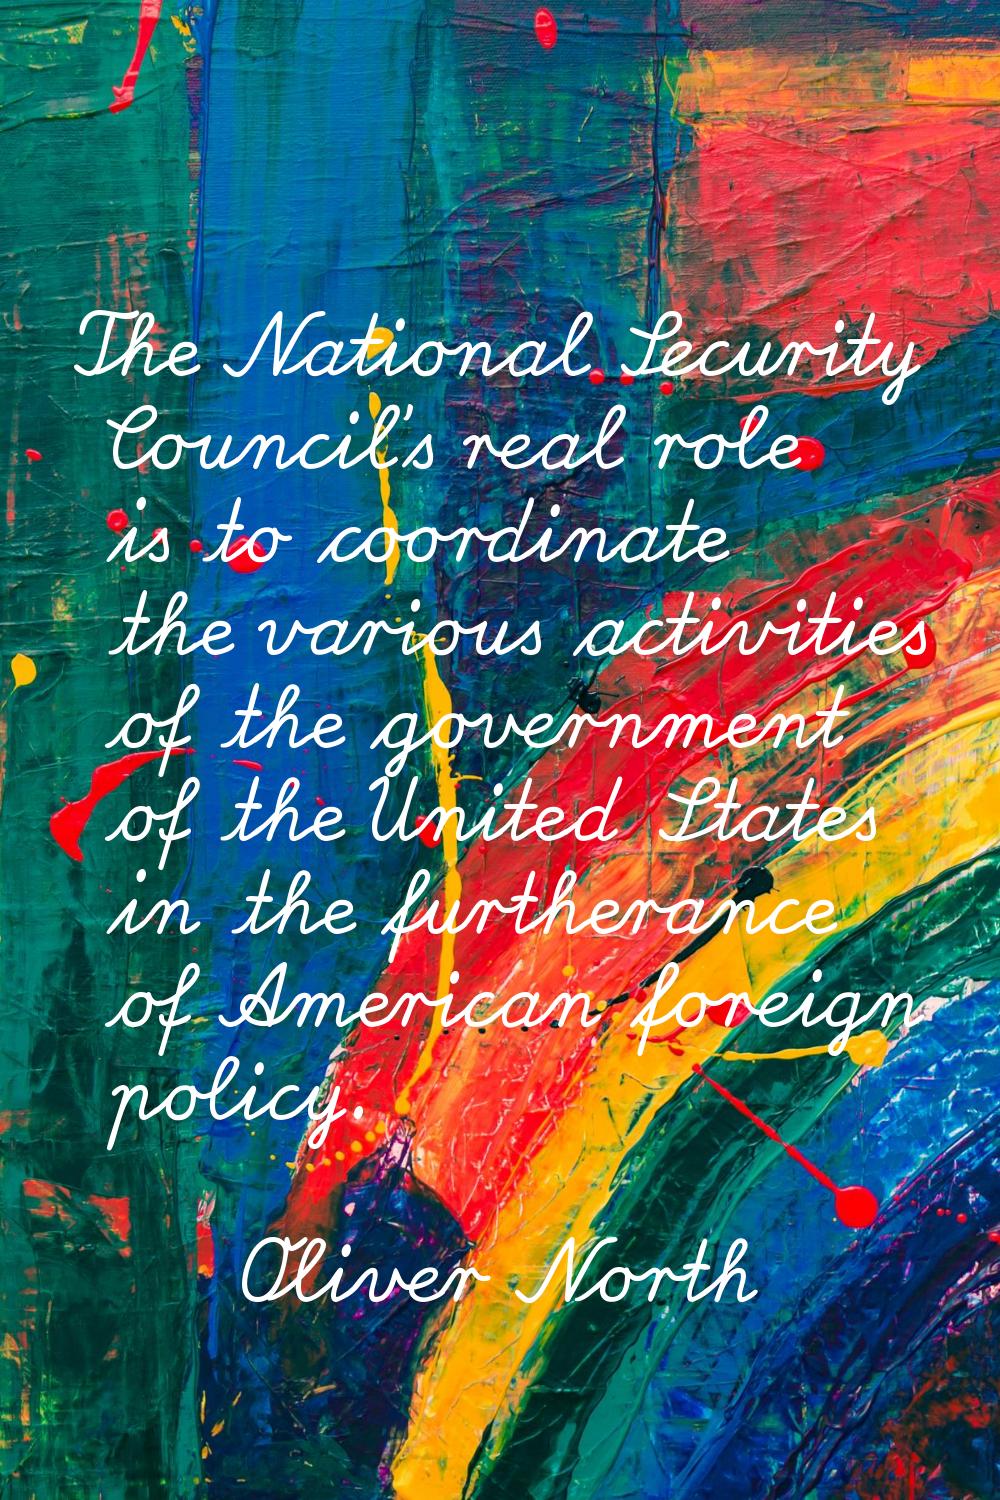 The National Security Council's real role is to coordinate the various activities of the government